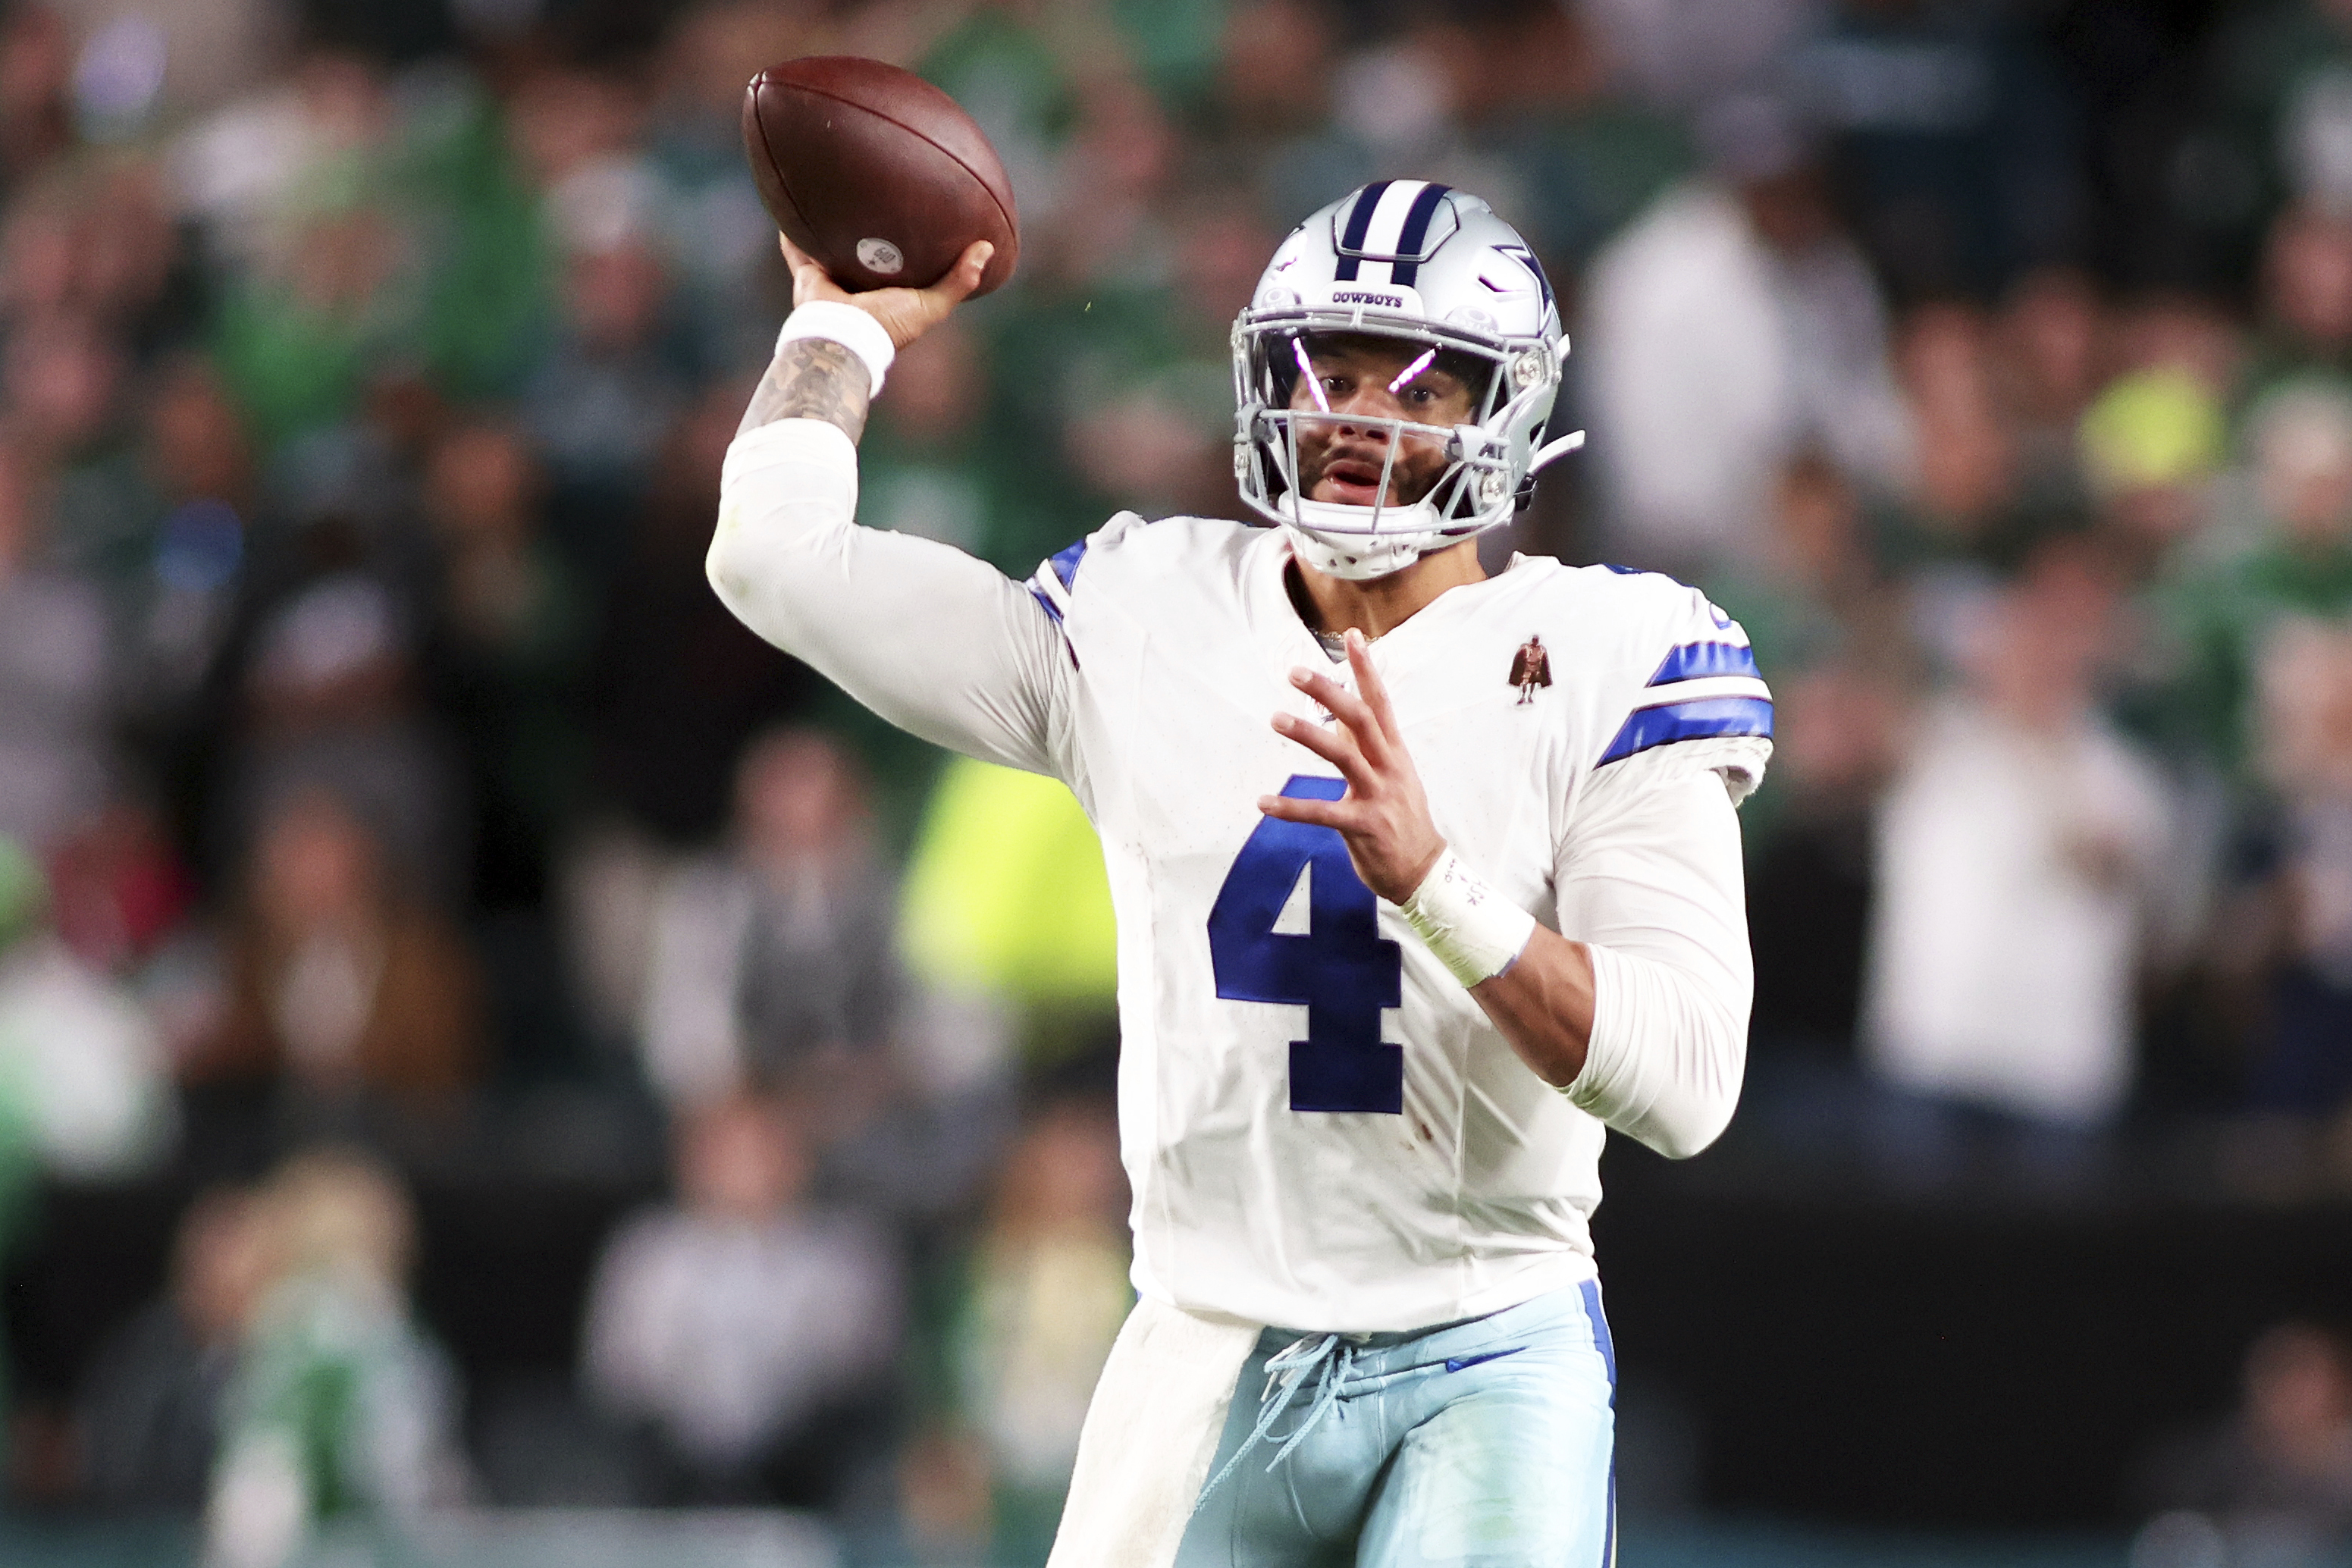 Giants vs Cowboys live stream: How to watch NFL week 10 online today